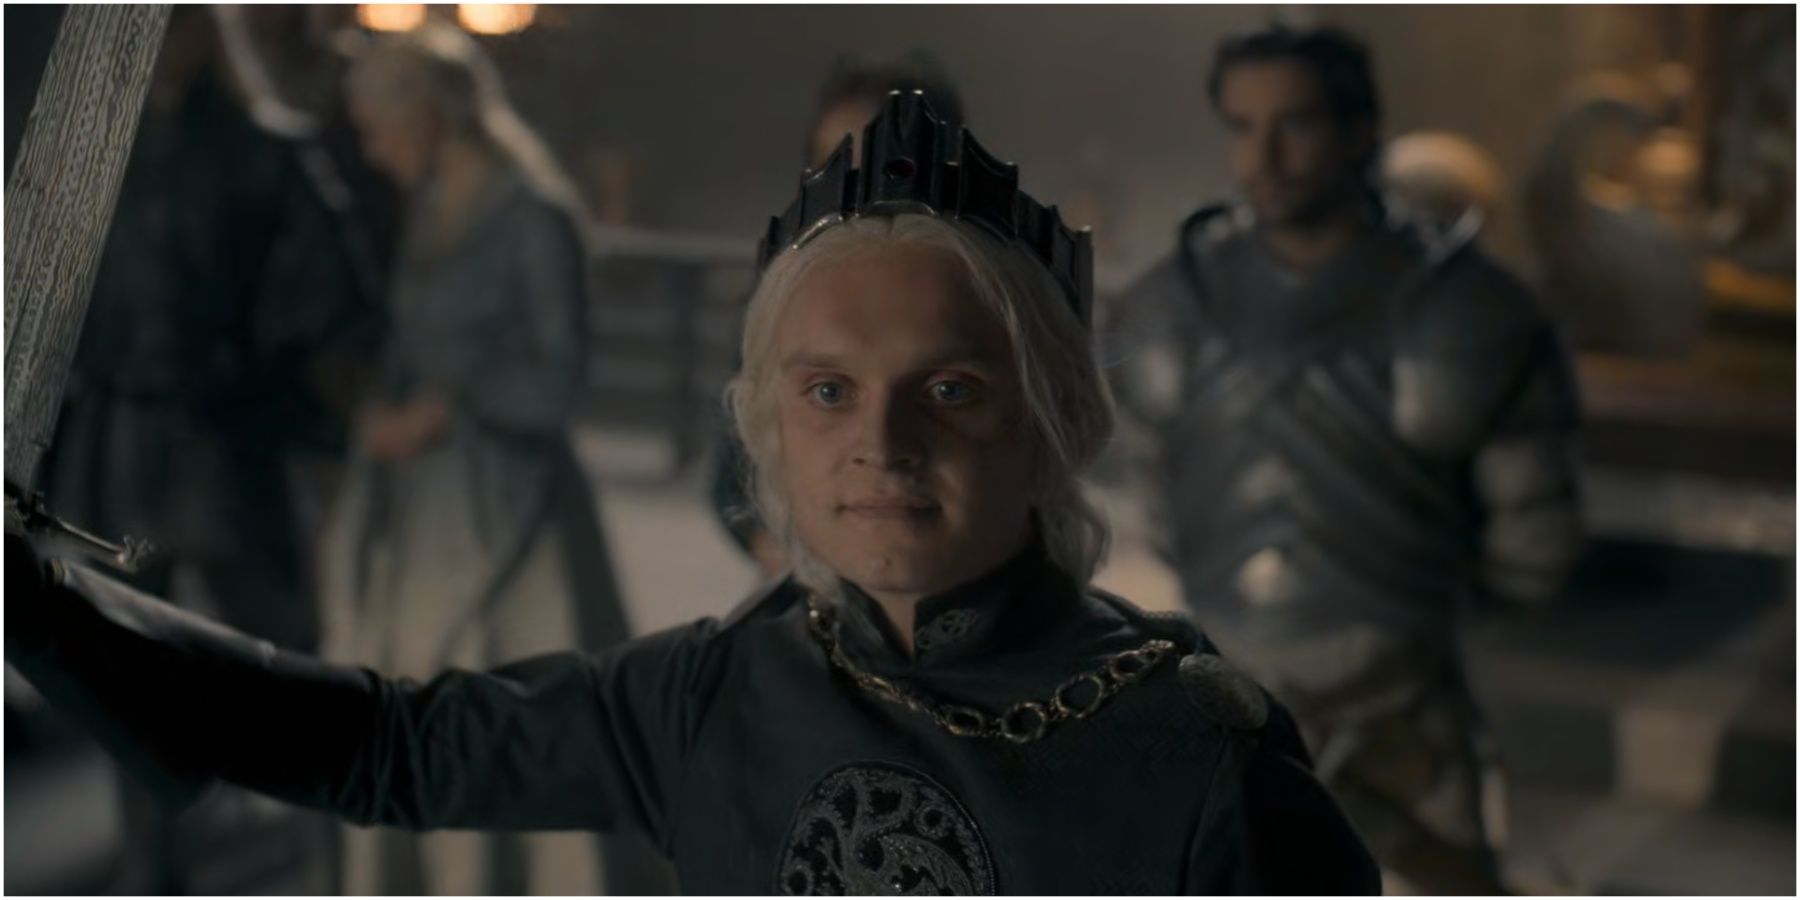 Aegon II Targaryen holds Blackfyre and wears the Conqueror’s crown in House of the Dragon